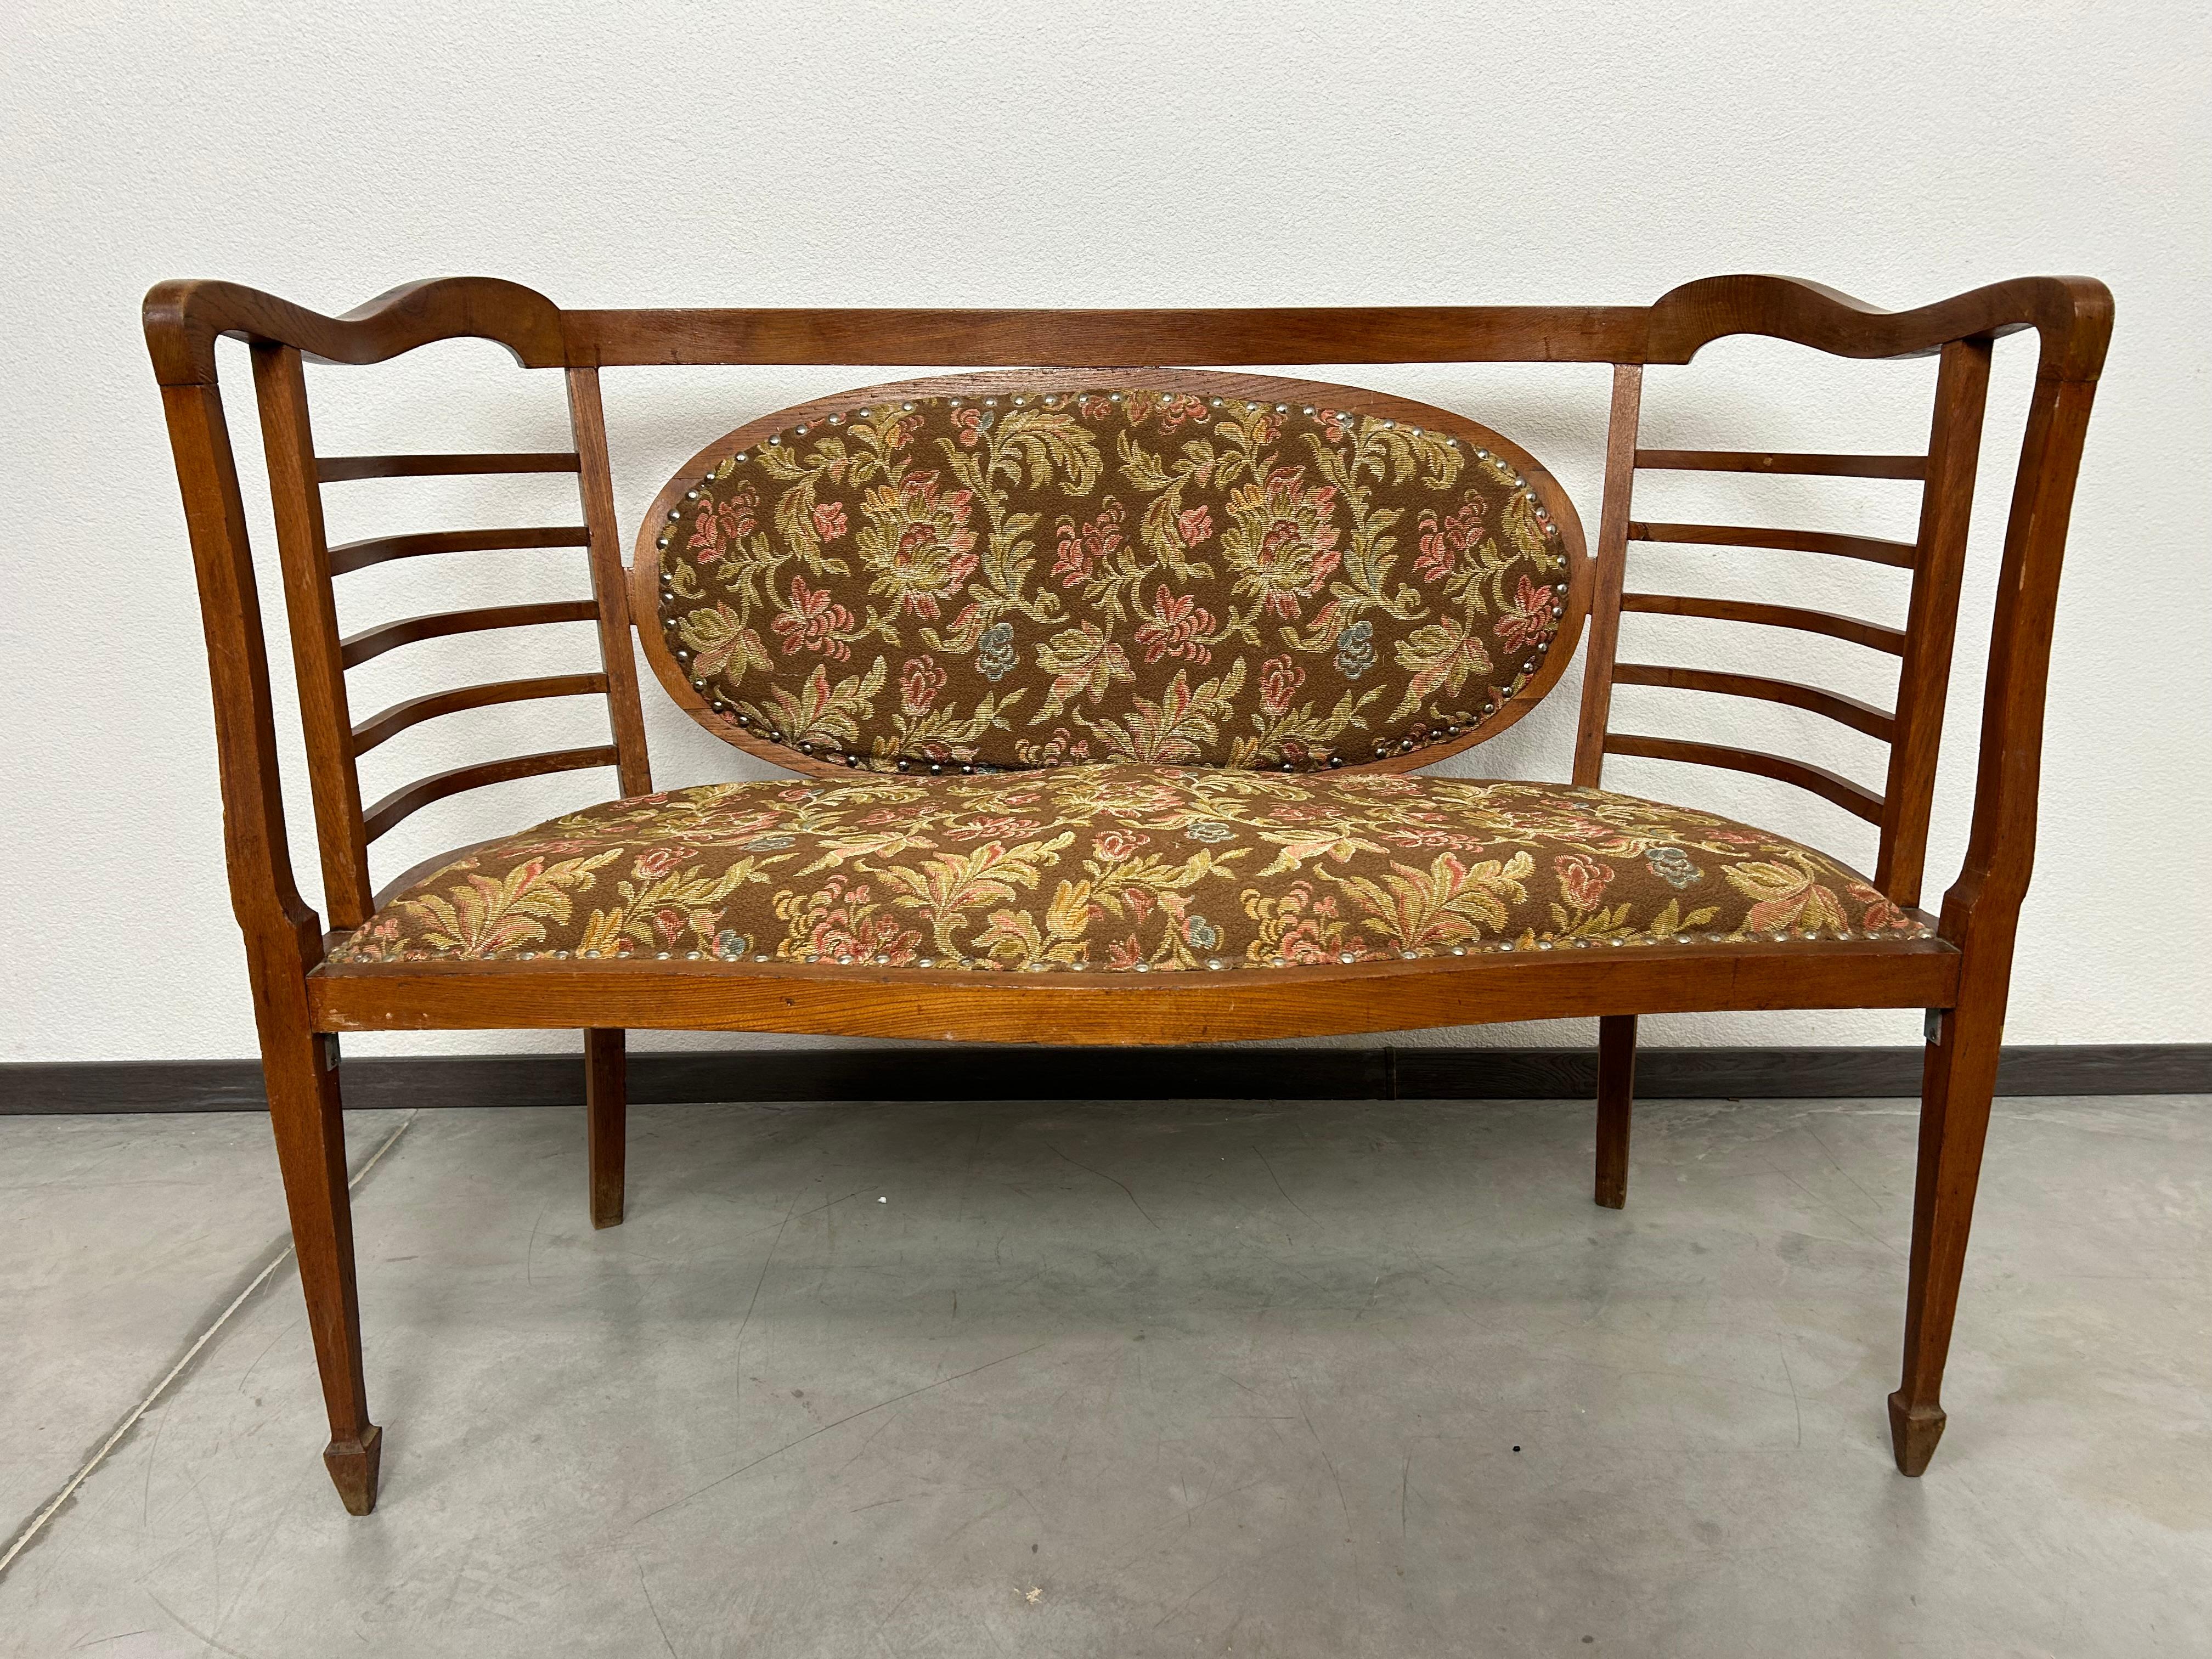 Very rare secession seating group used in Otto Wagners Vila in Wien. Original vintage condition with signs of use.